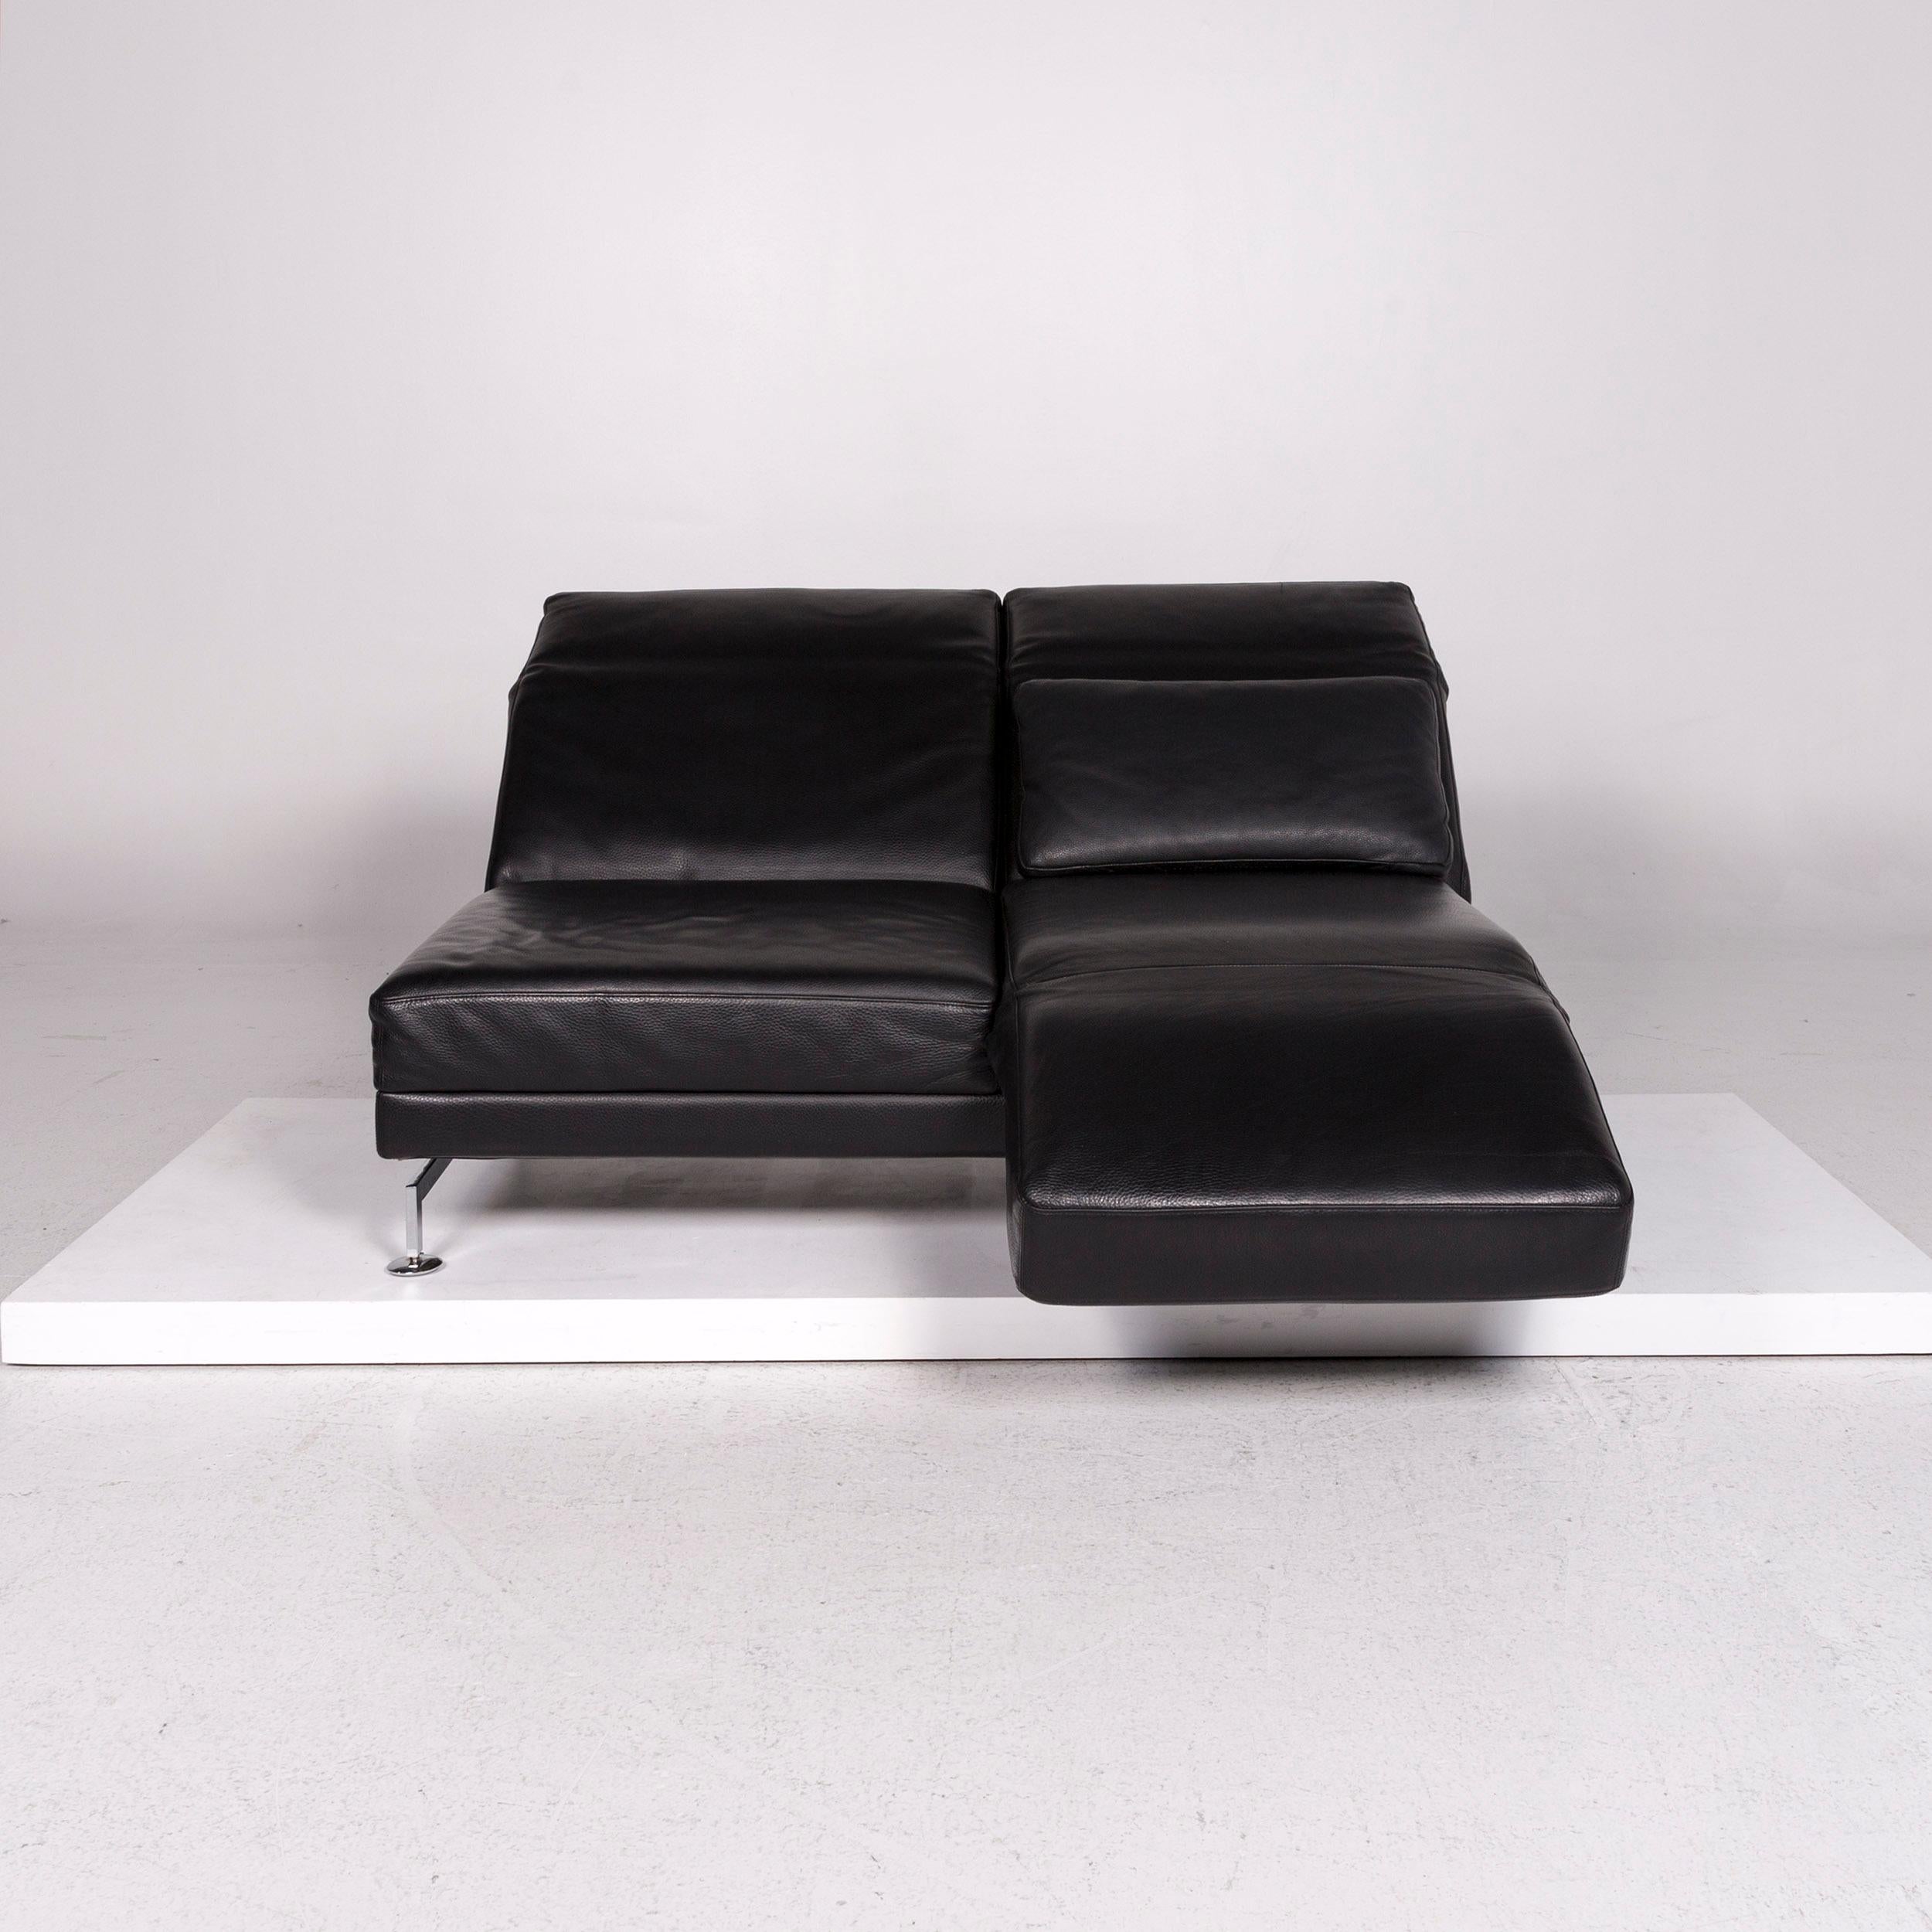 We bring to you a Brühl & Sippold Moule leather sofa black two-seat relax function couch.

 

 Product measurements in centimeters:
 

Depth 90
Width 170
Height 90
Seat-height 40
Rest-height 70
Seat-depth 70
Seat-width 145
Back-height